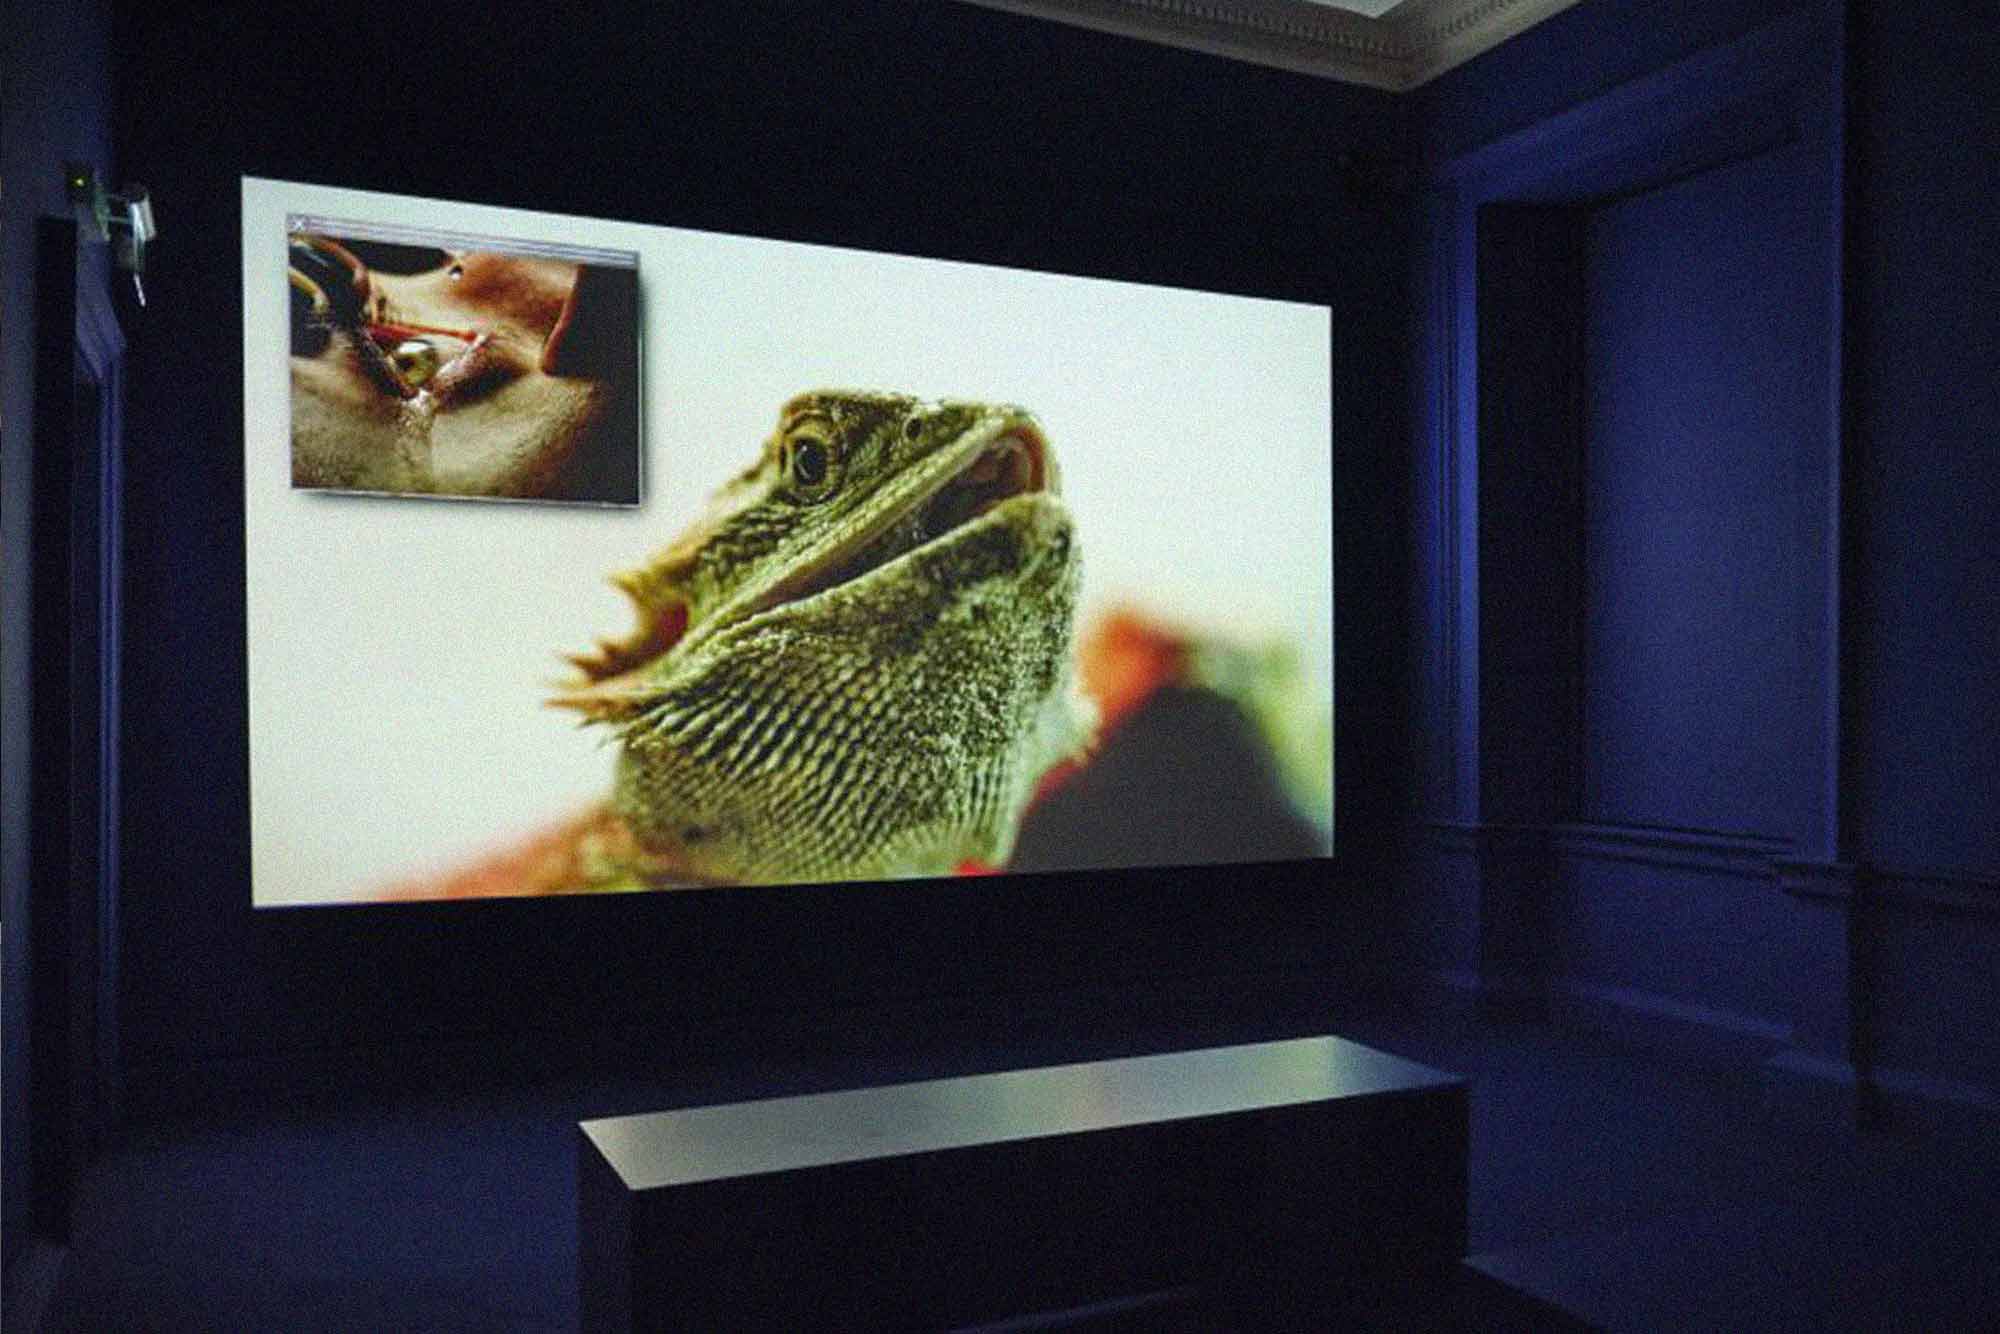 Interior installation photograph inside a darkened gallery room with a bench in front of a screen. A video installation showing a lizard and a human eye is being played on screen